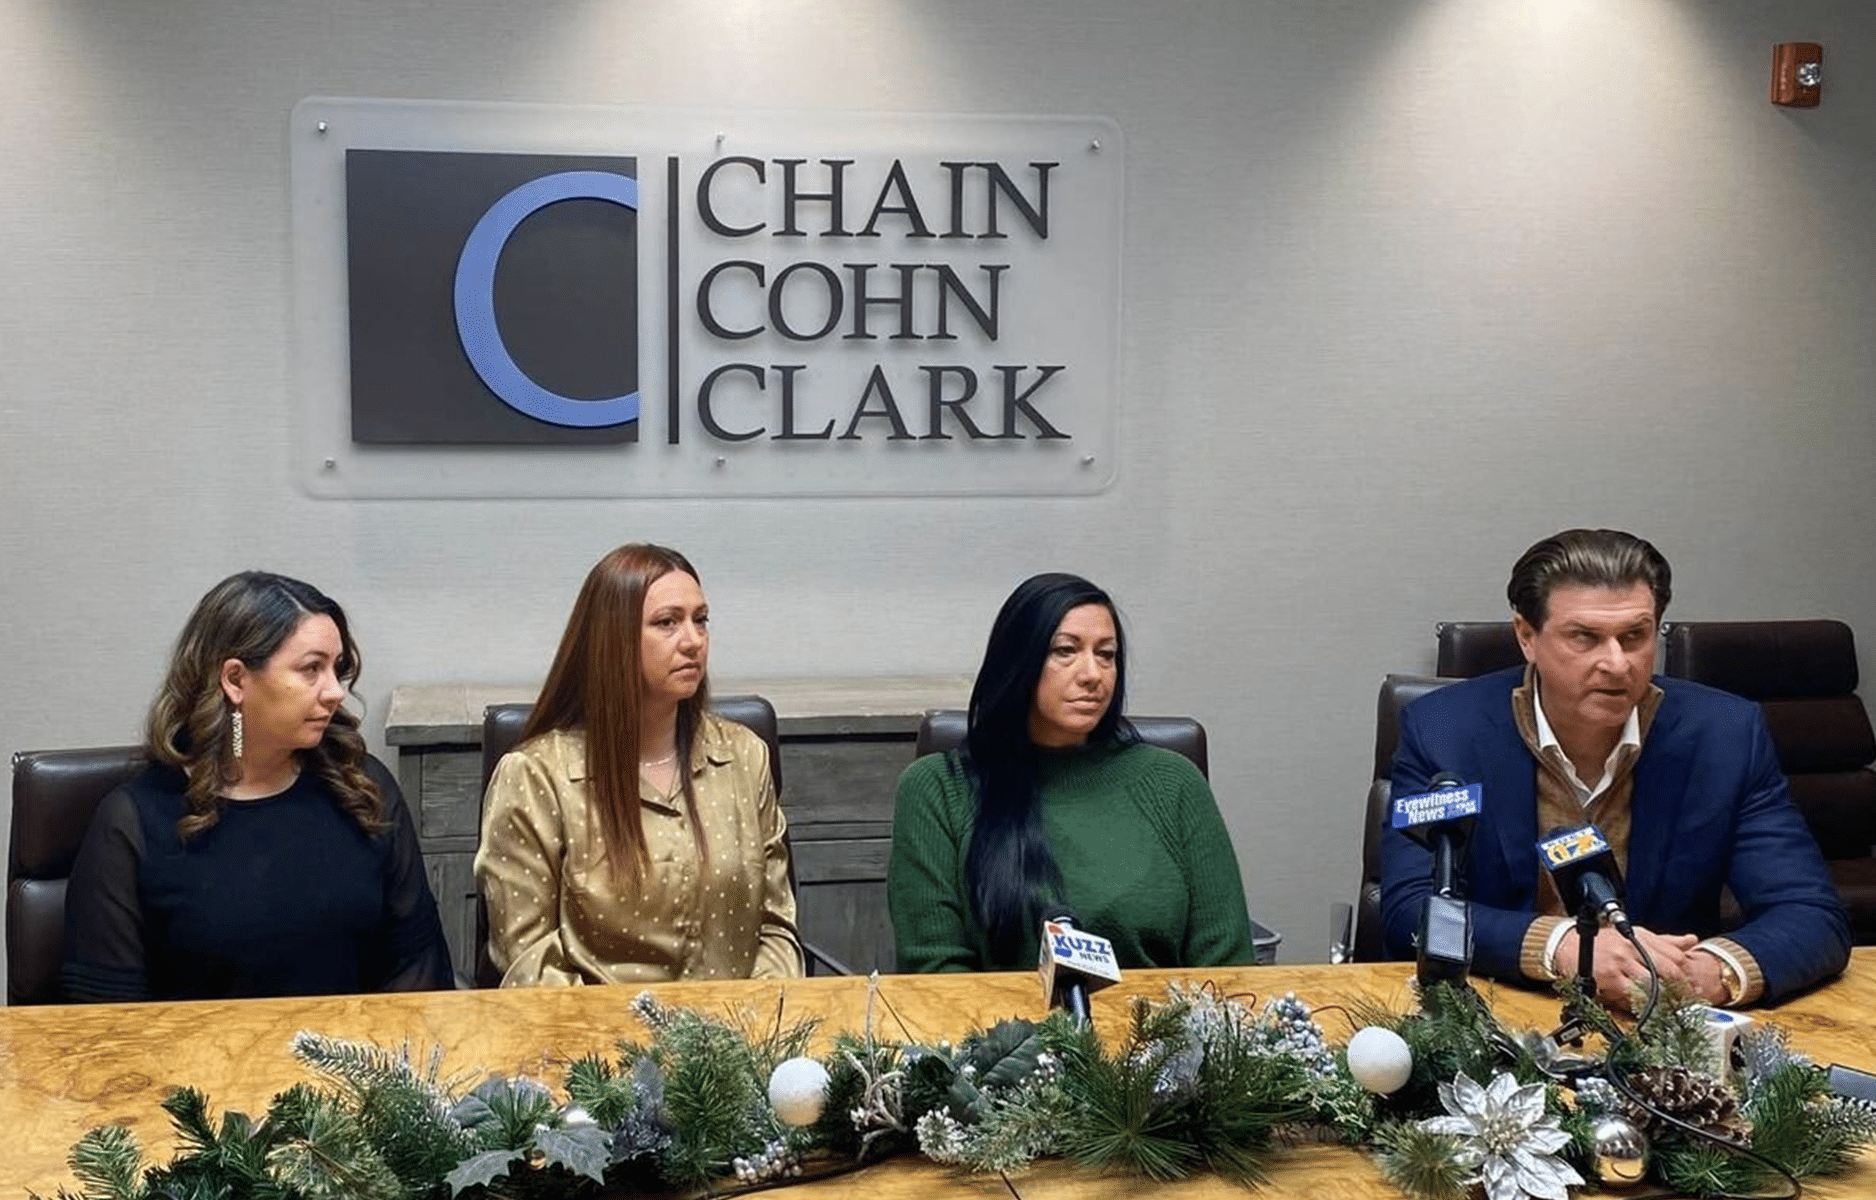 Family of ‘Bakersfield Christmas Parade’ DUI Crash Victim Speak About ‘Hero’ Father, Grandfather (Chain | Cohn | Clark Lawsuit)